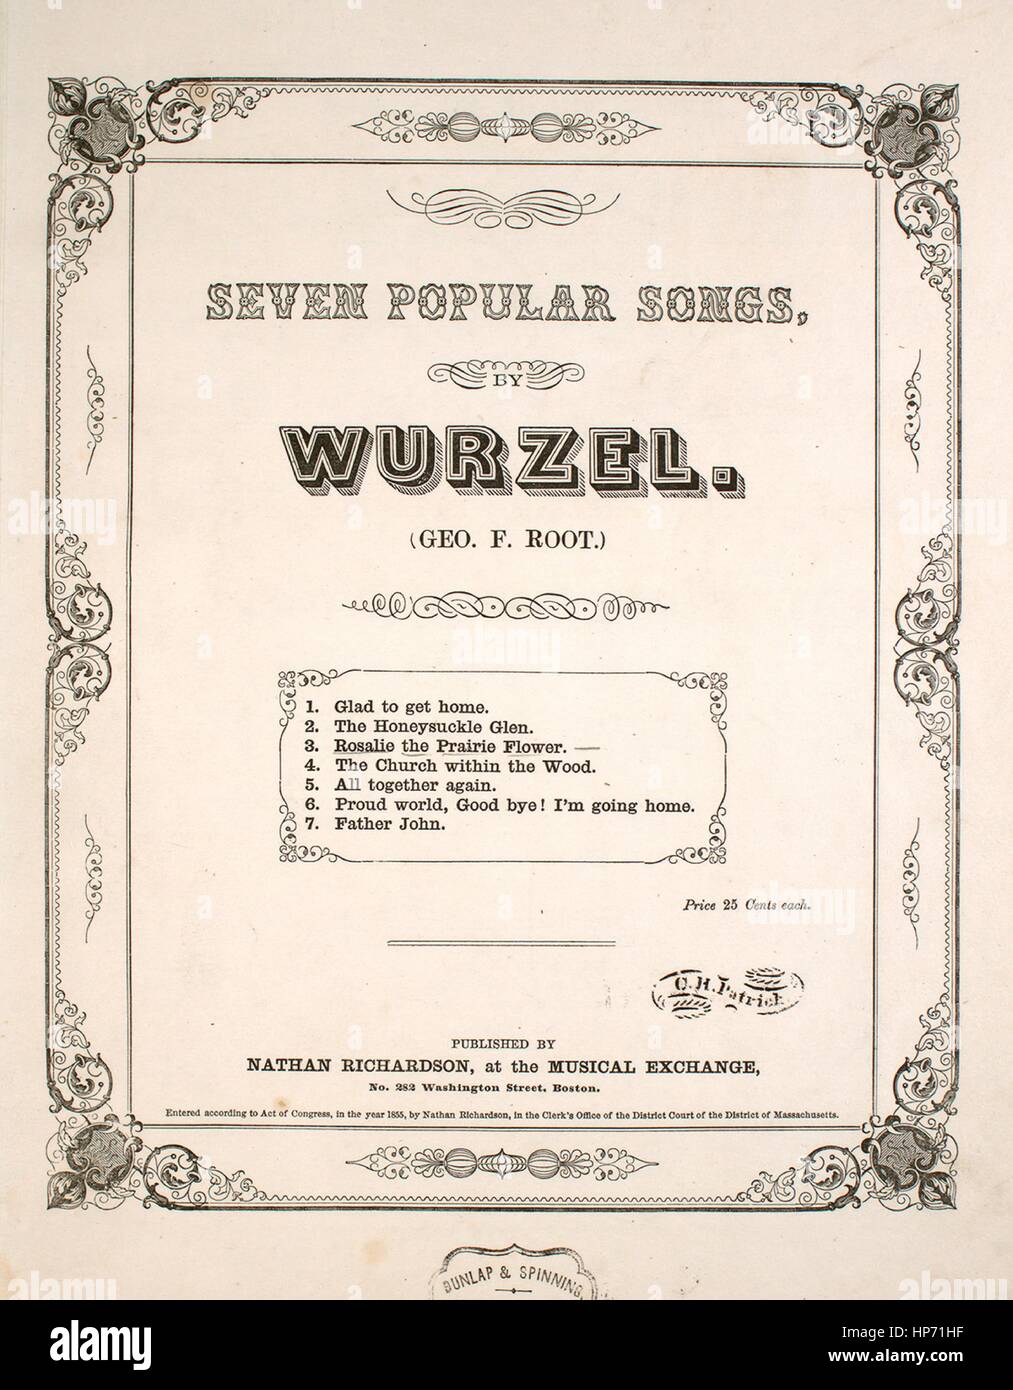 Sheet music cover image of the song 'Seven Popular Songs by Wurzel (Geo F Root) No 3 Rosalie the Prairie Flower', with original authorship notes reading 'Wurzel (GFR)', United States, 1855. The publisher is listed as 'Nathan Richardson, at the Musical Exchange, No. 282 Washington Street', the form of composition is 'strophic with chorus', the instrumentation is 'piano and voice (solo and satb chorus)', the first line reads 'On the distant prairie, where the heather wild', and the illustration artist is listed as 'None'. Stock Photo